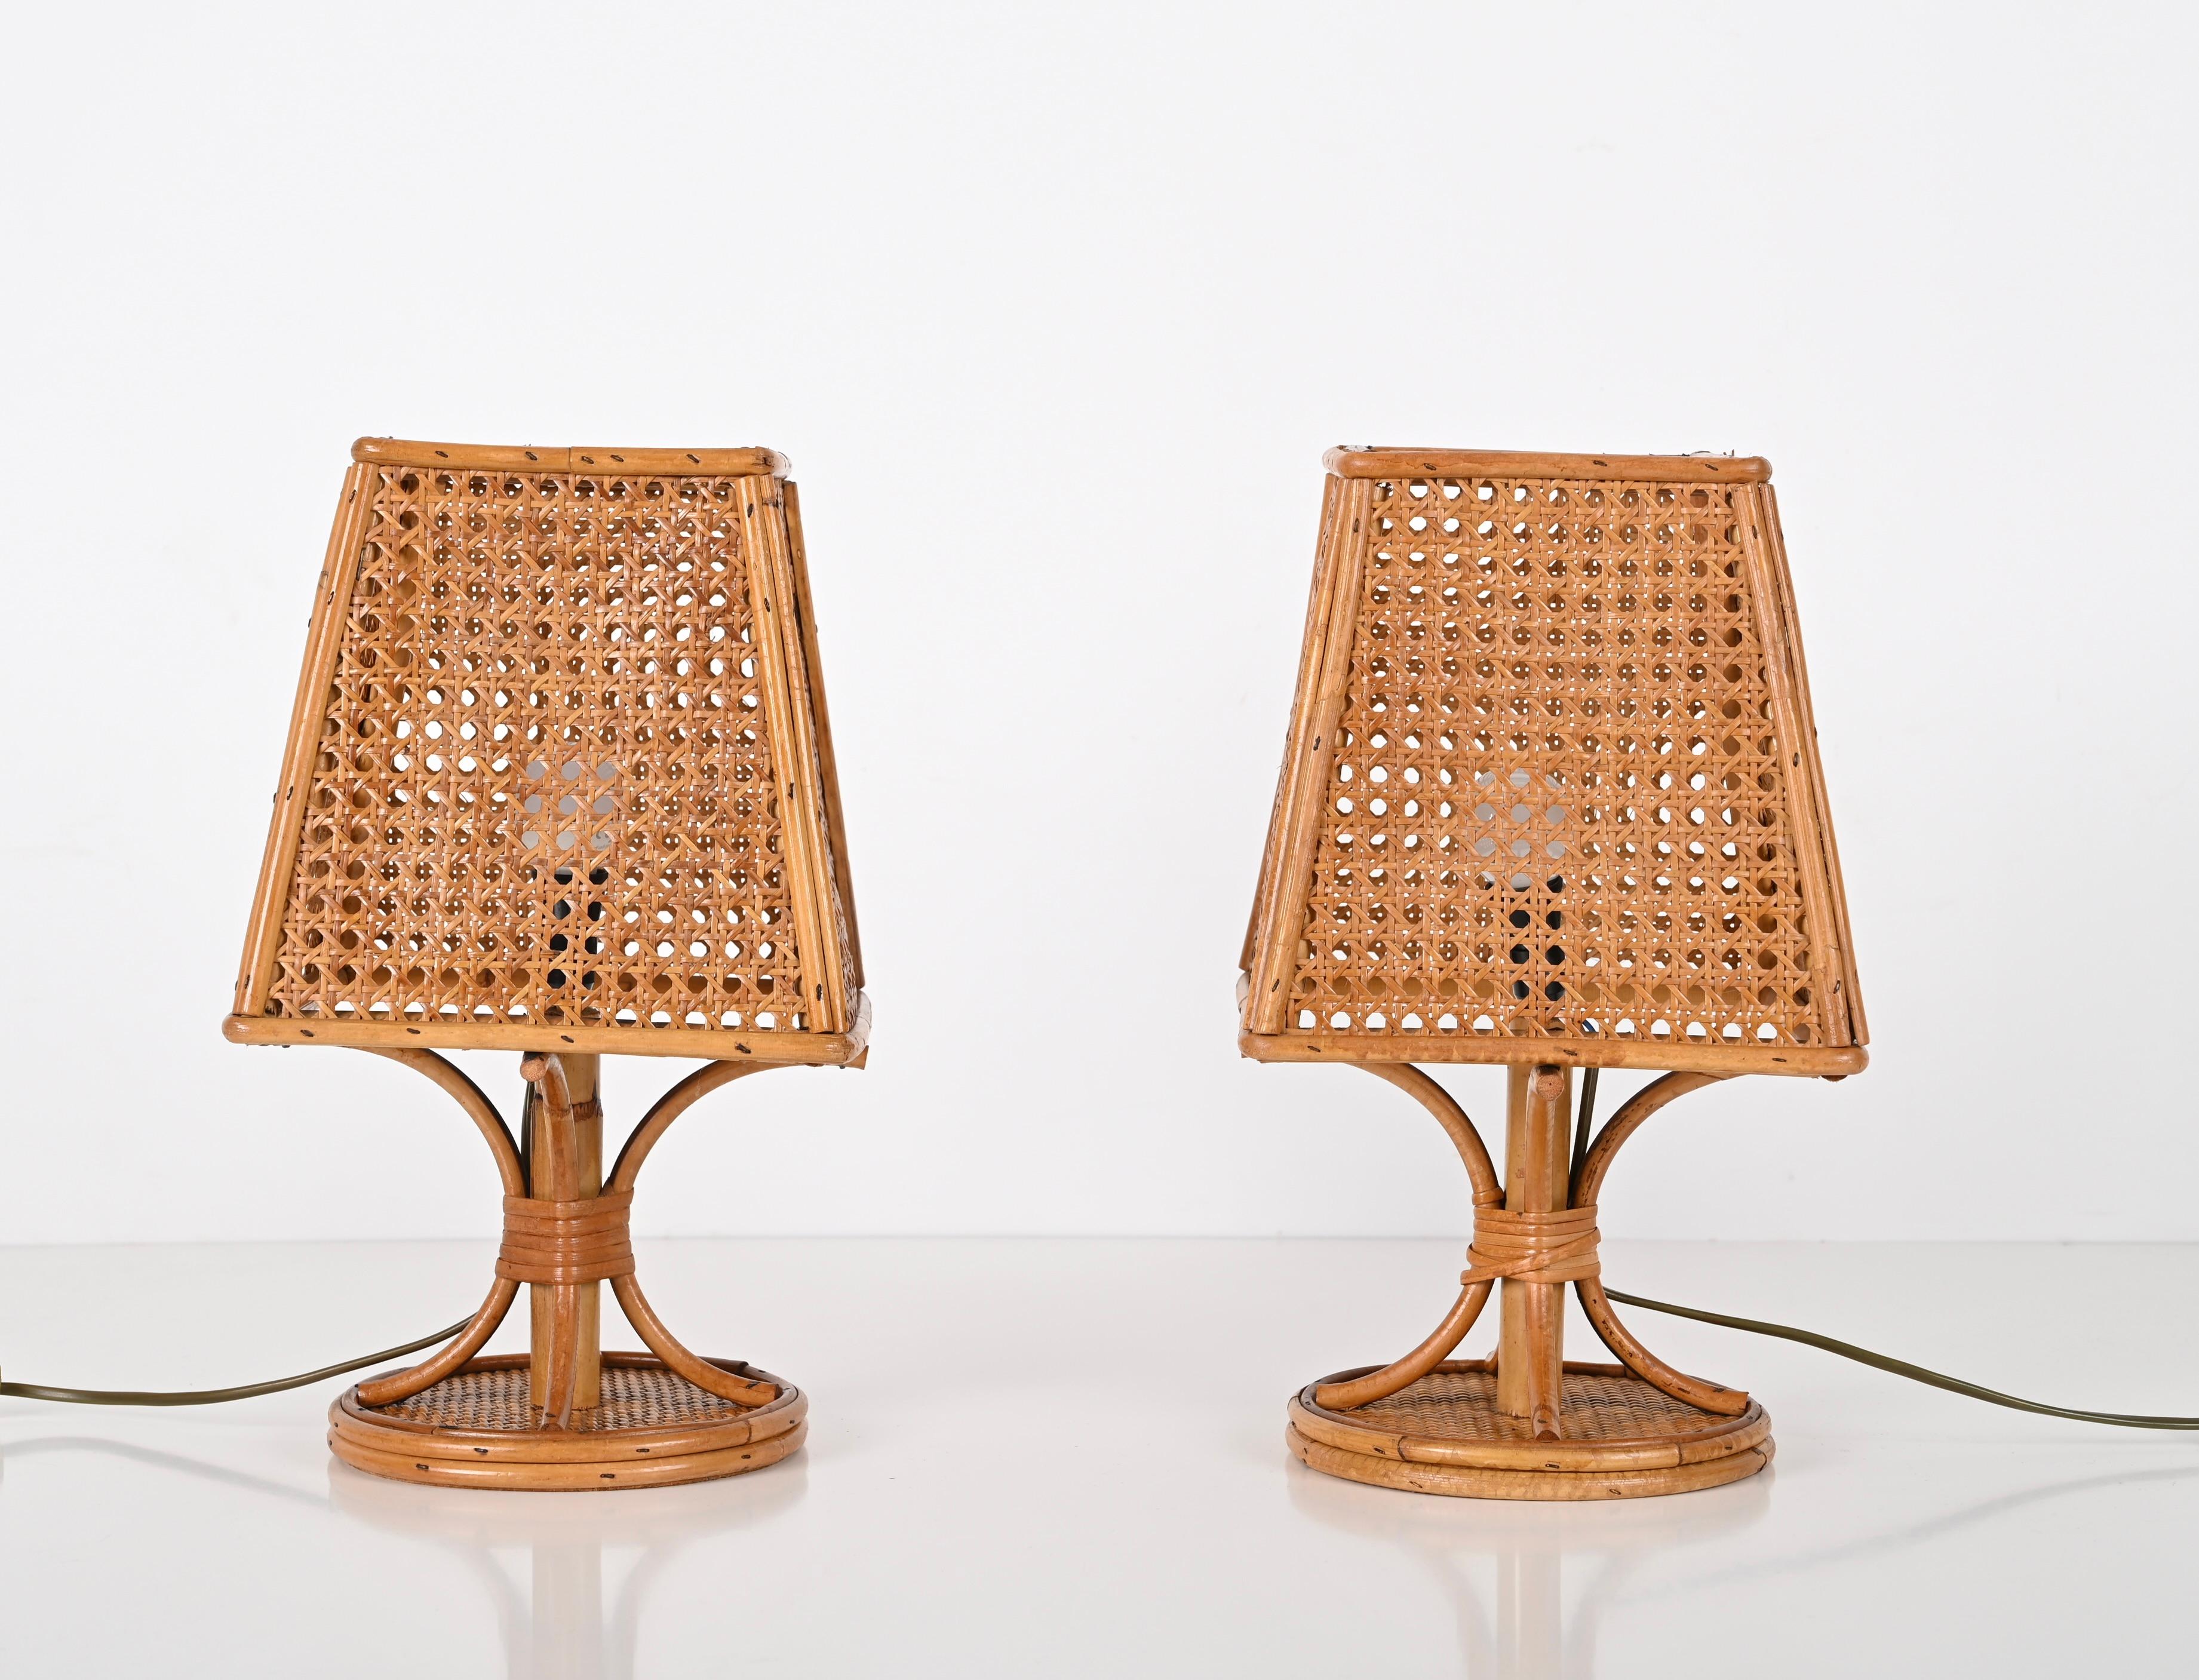 Bamboo Pair of French Riviera Table Lamps in Wicker and Rattan, Italy 1960s